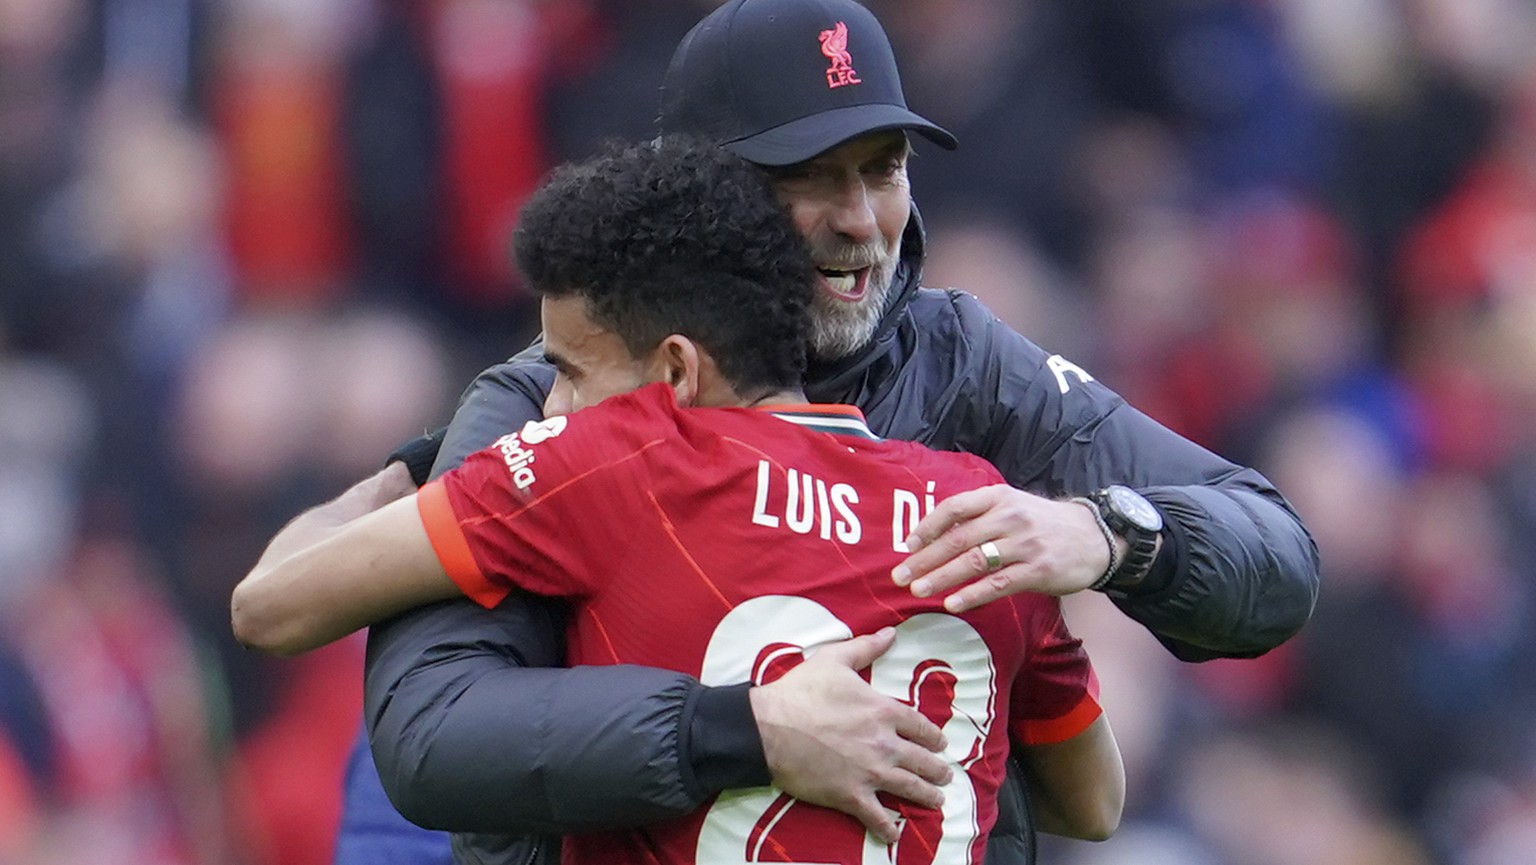 Liverpool&#039;s manager Jurgen Klopp embraces Liverpool&#039;s Luis Diaz after the FA Cup fourth round soccer match between Liverpool and Cardiff City at Anfield stadium in Liverpool, England, Sunday ...